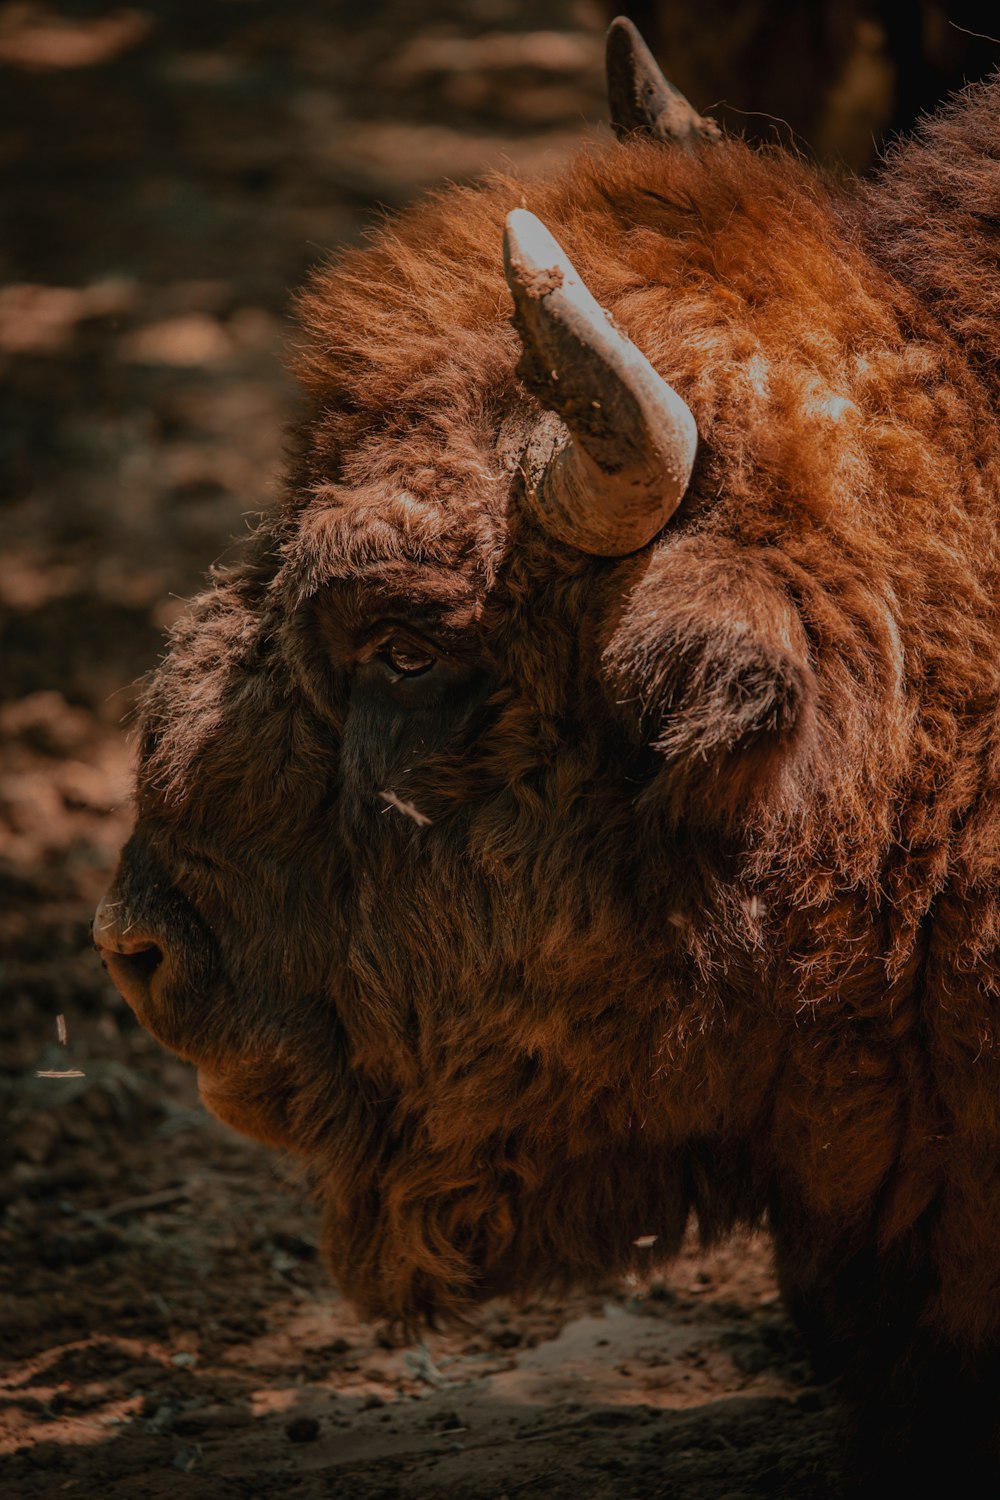 a close up of a bison with a long horn